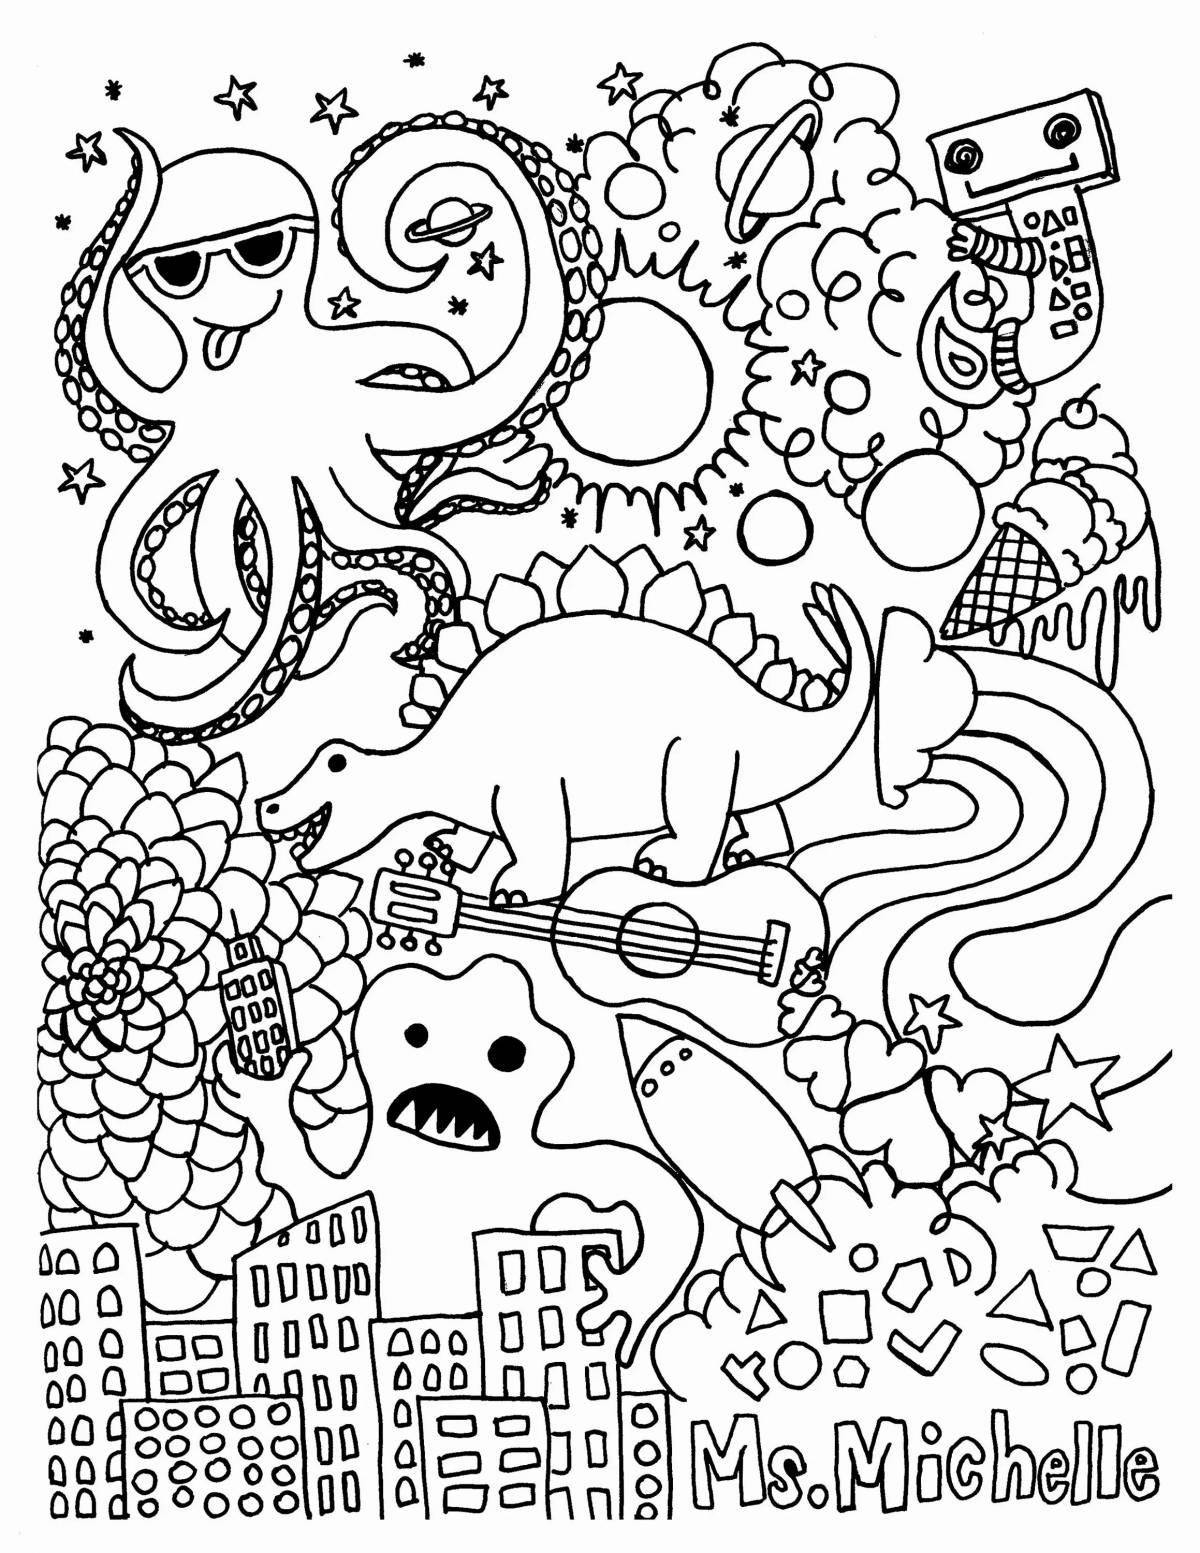 Creative coloring poster